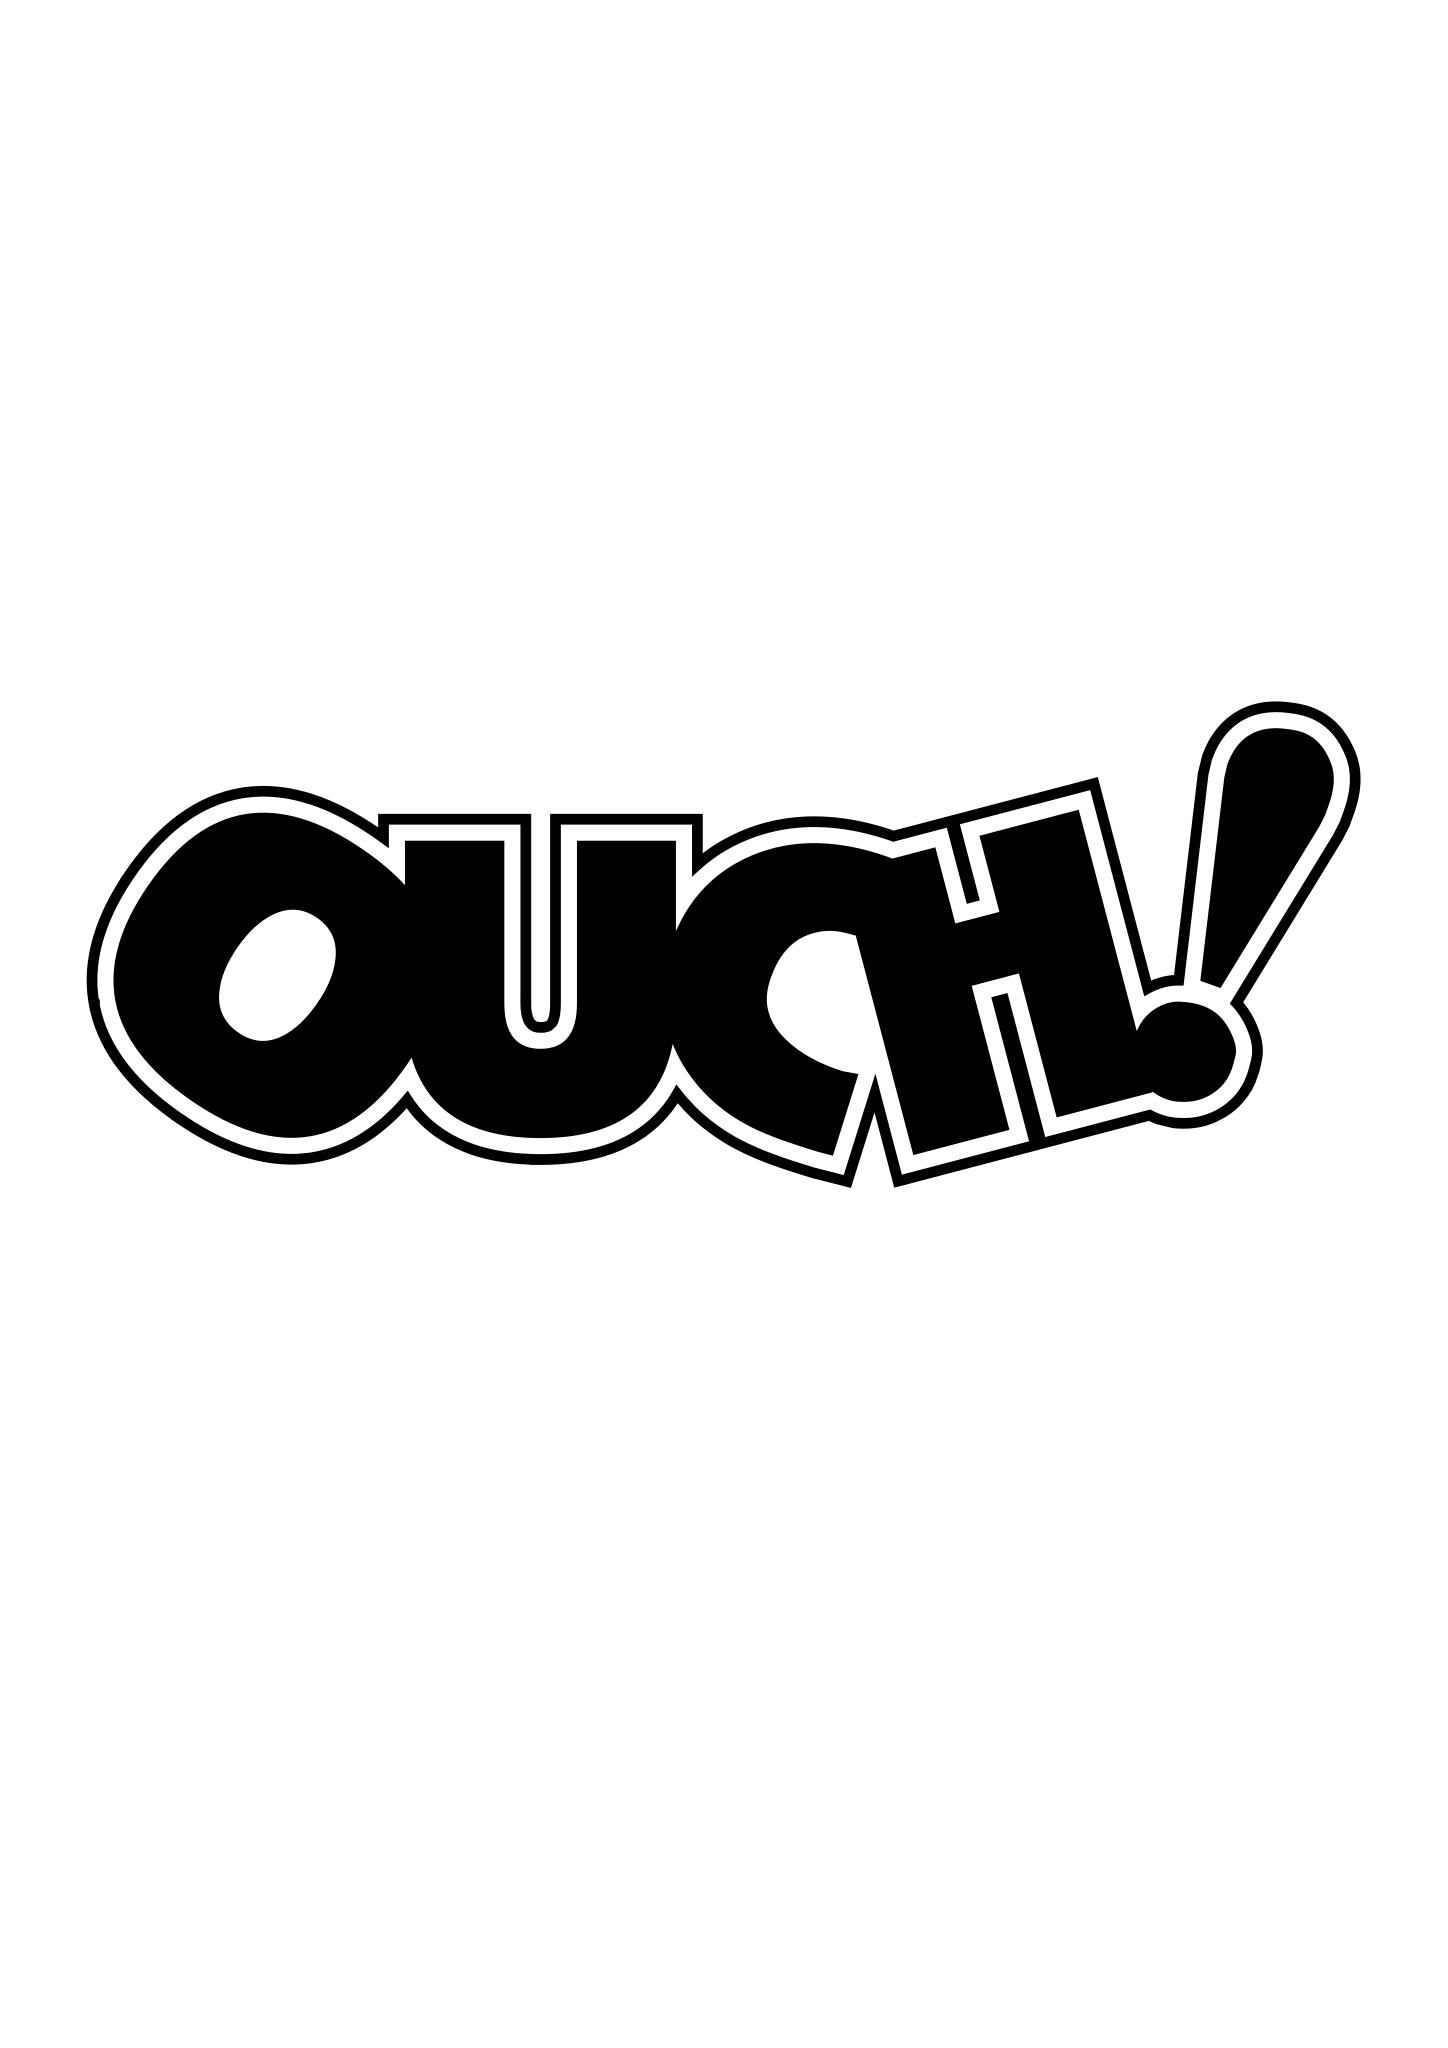 Free Images - ouch comics onomatopoeia cartoon.